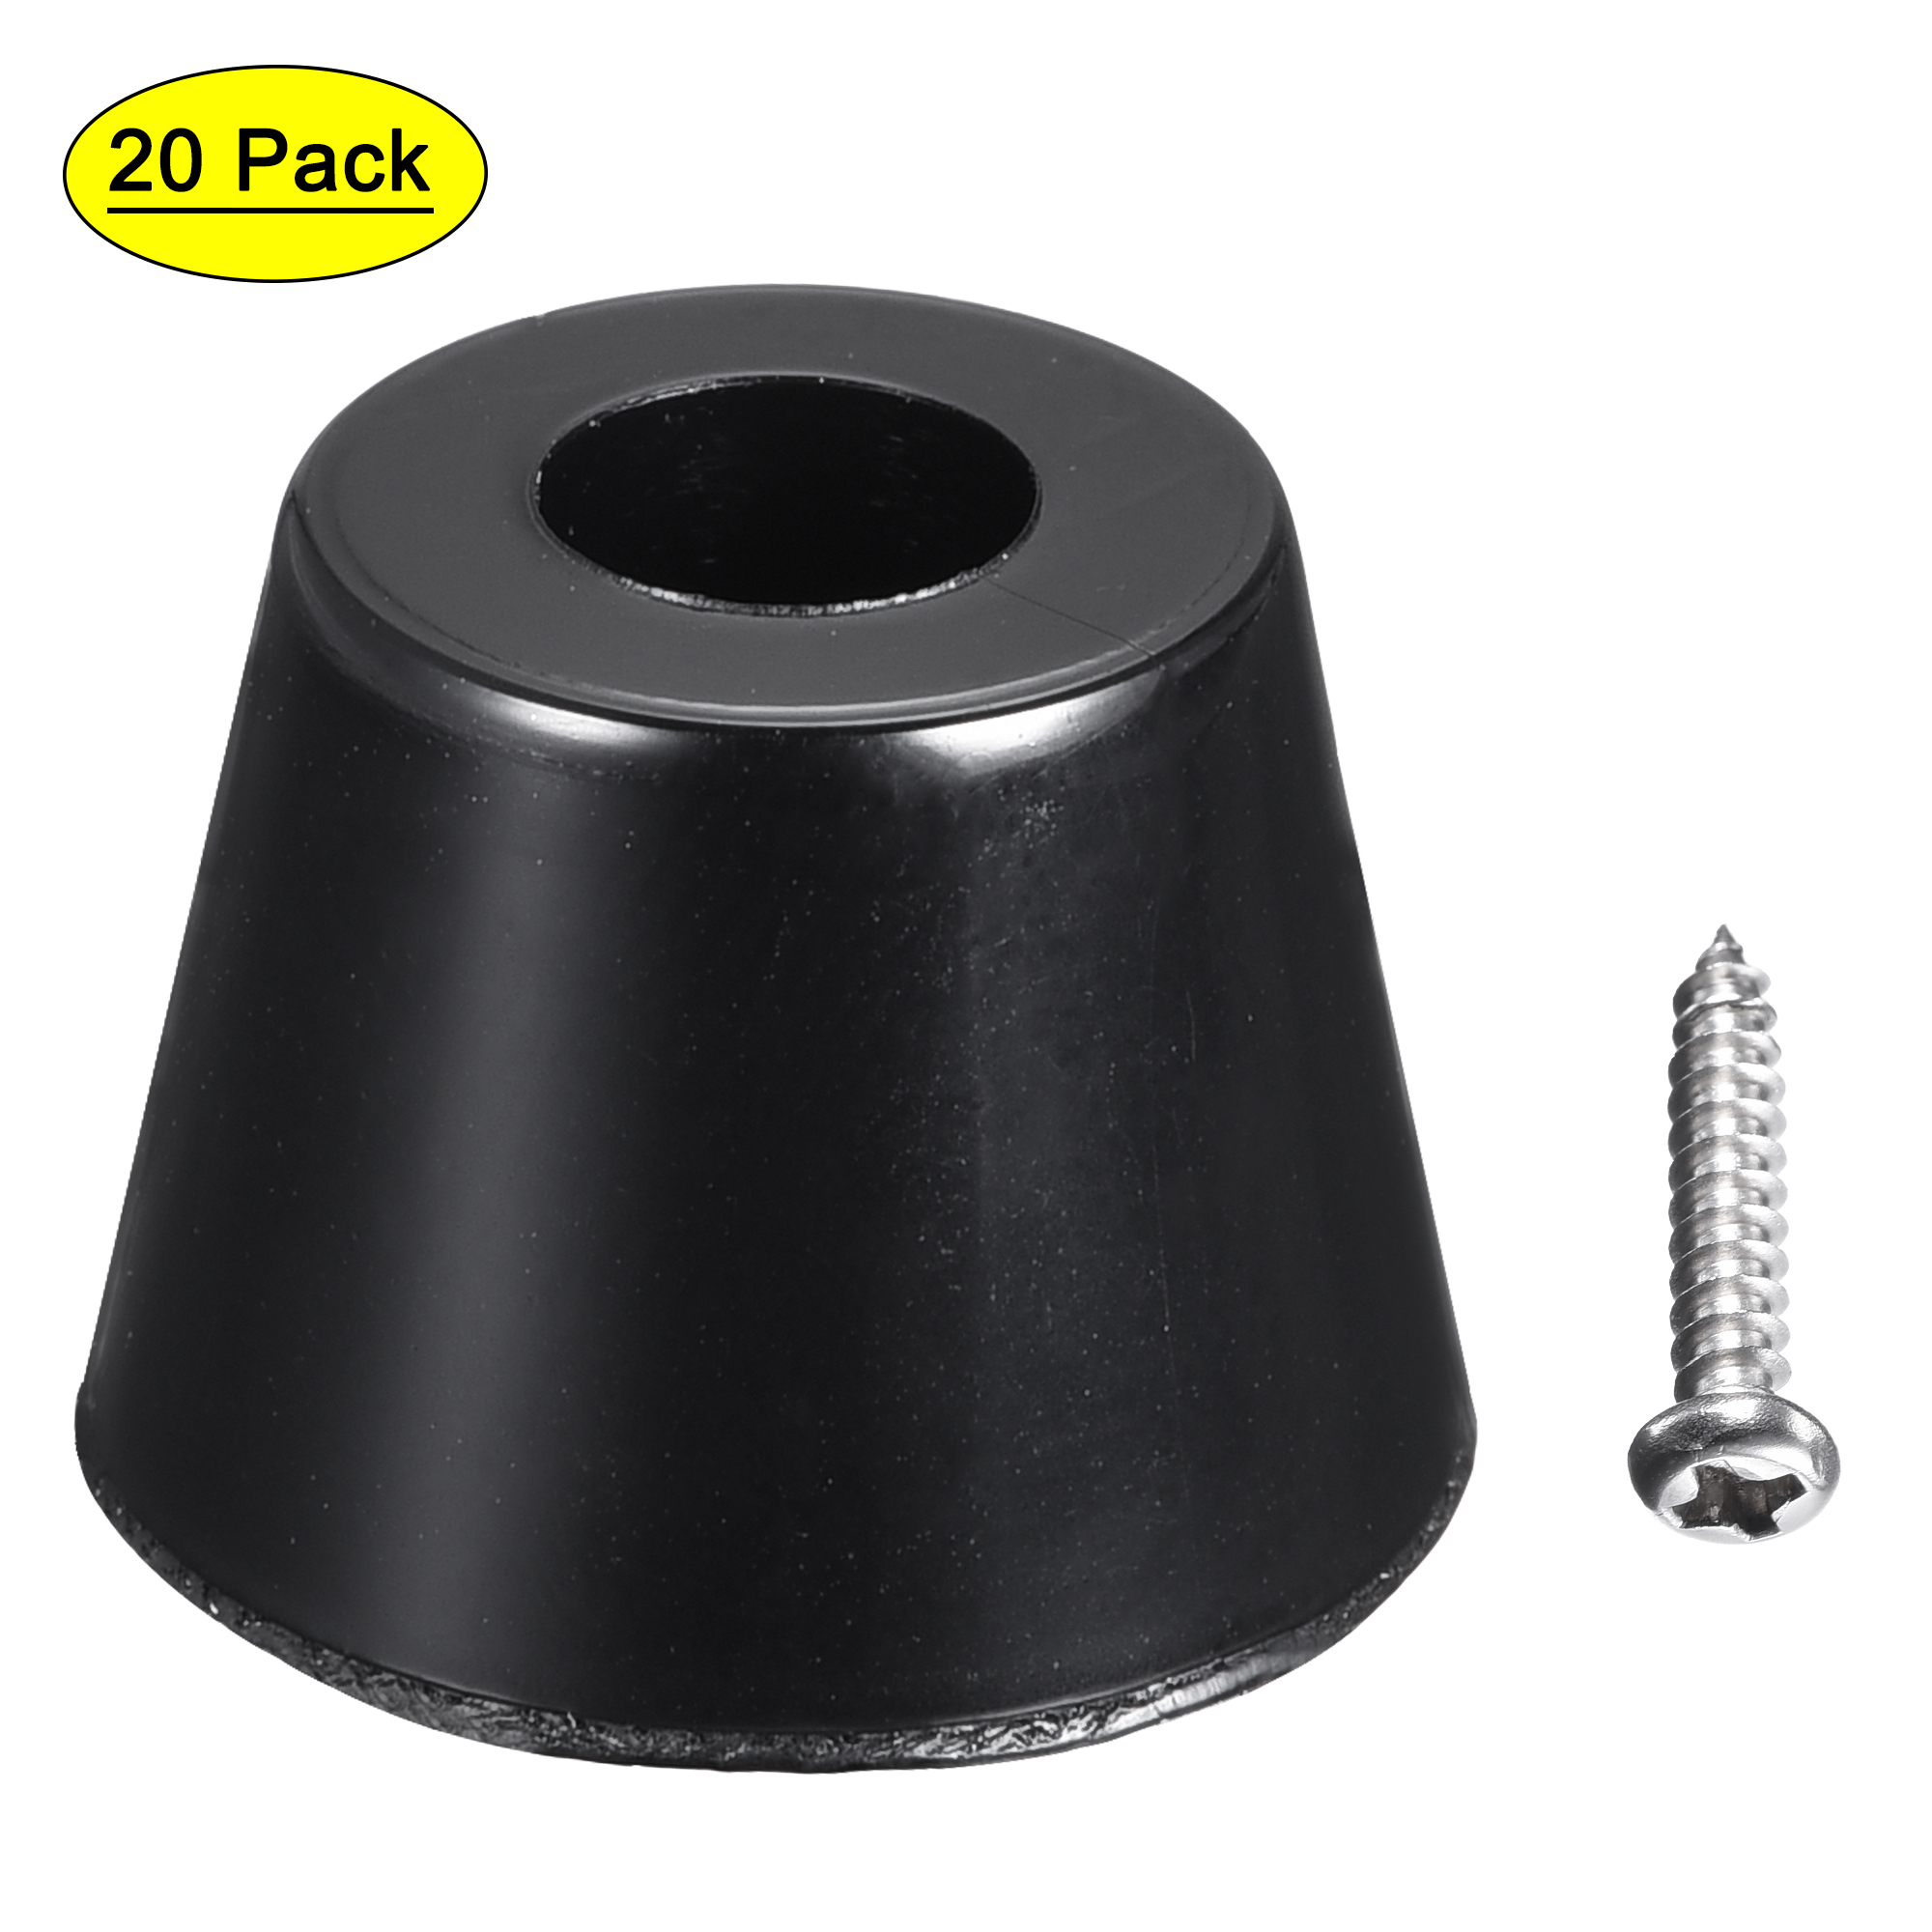 Uxcell 0.67" W x  0.51" H Rubber Bumper Feet, Stainless Steel Screws and Washer 20 Pack - image 1 of 5